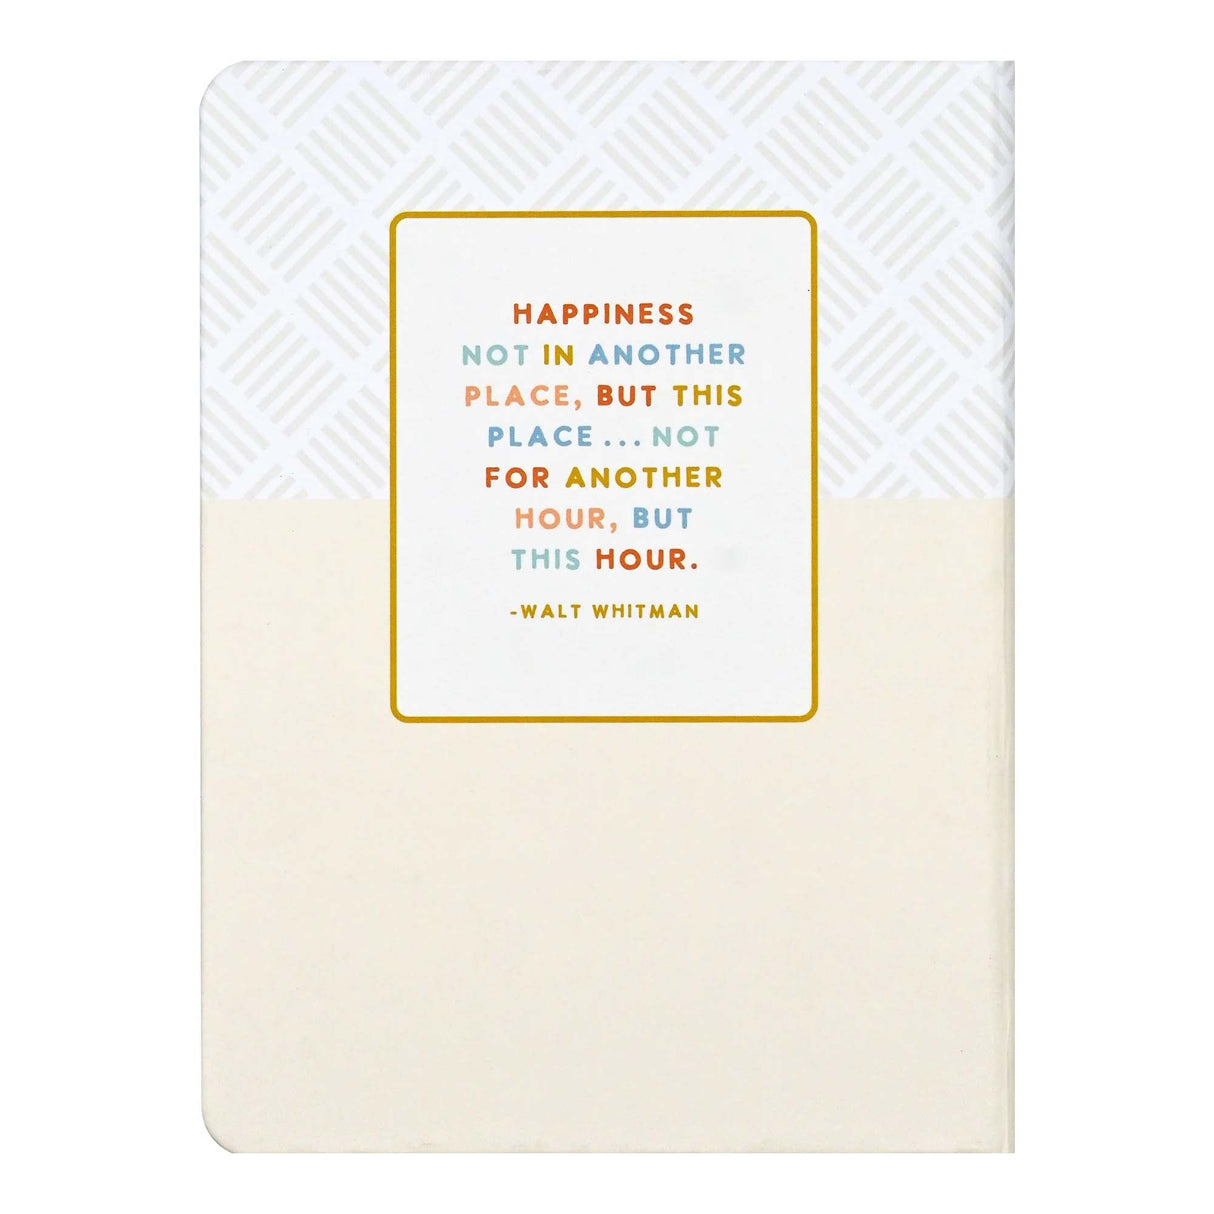 Positive Thinking Journal